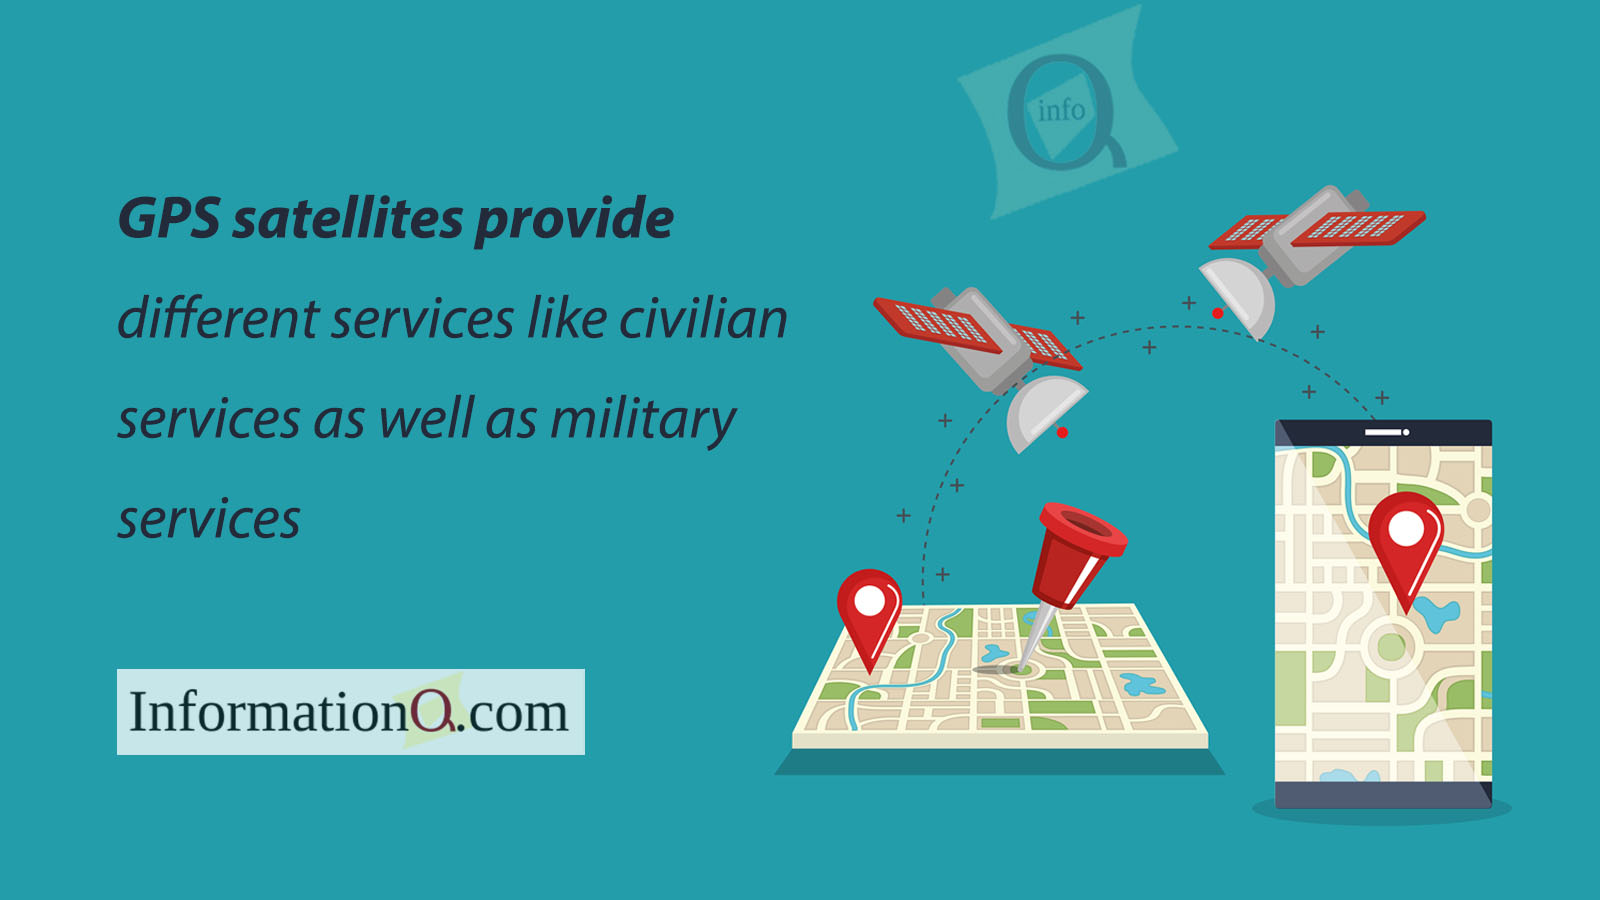 GPS satellites provide different services like civilian services as well as military services. 